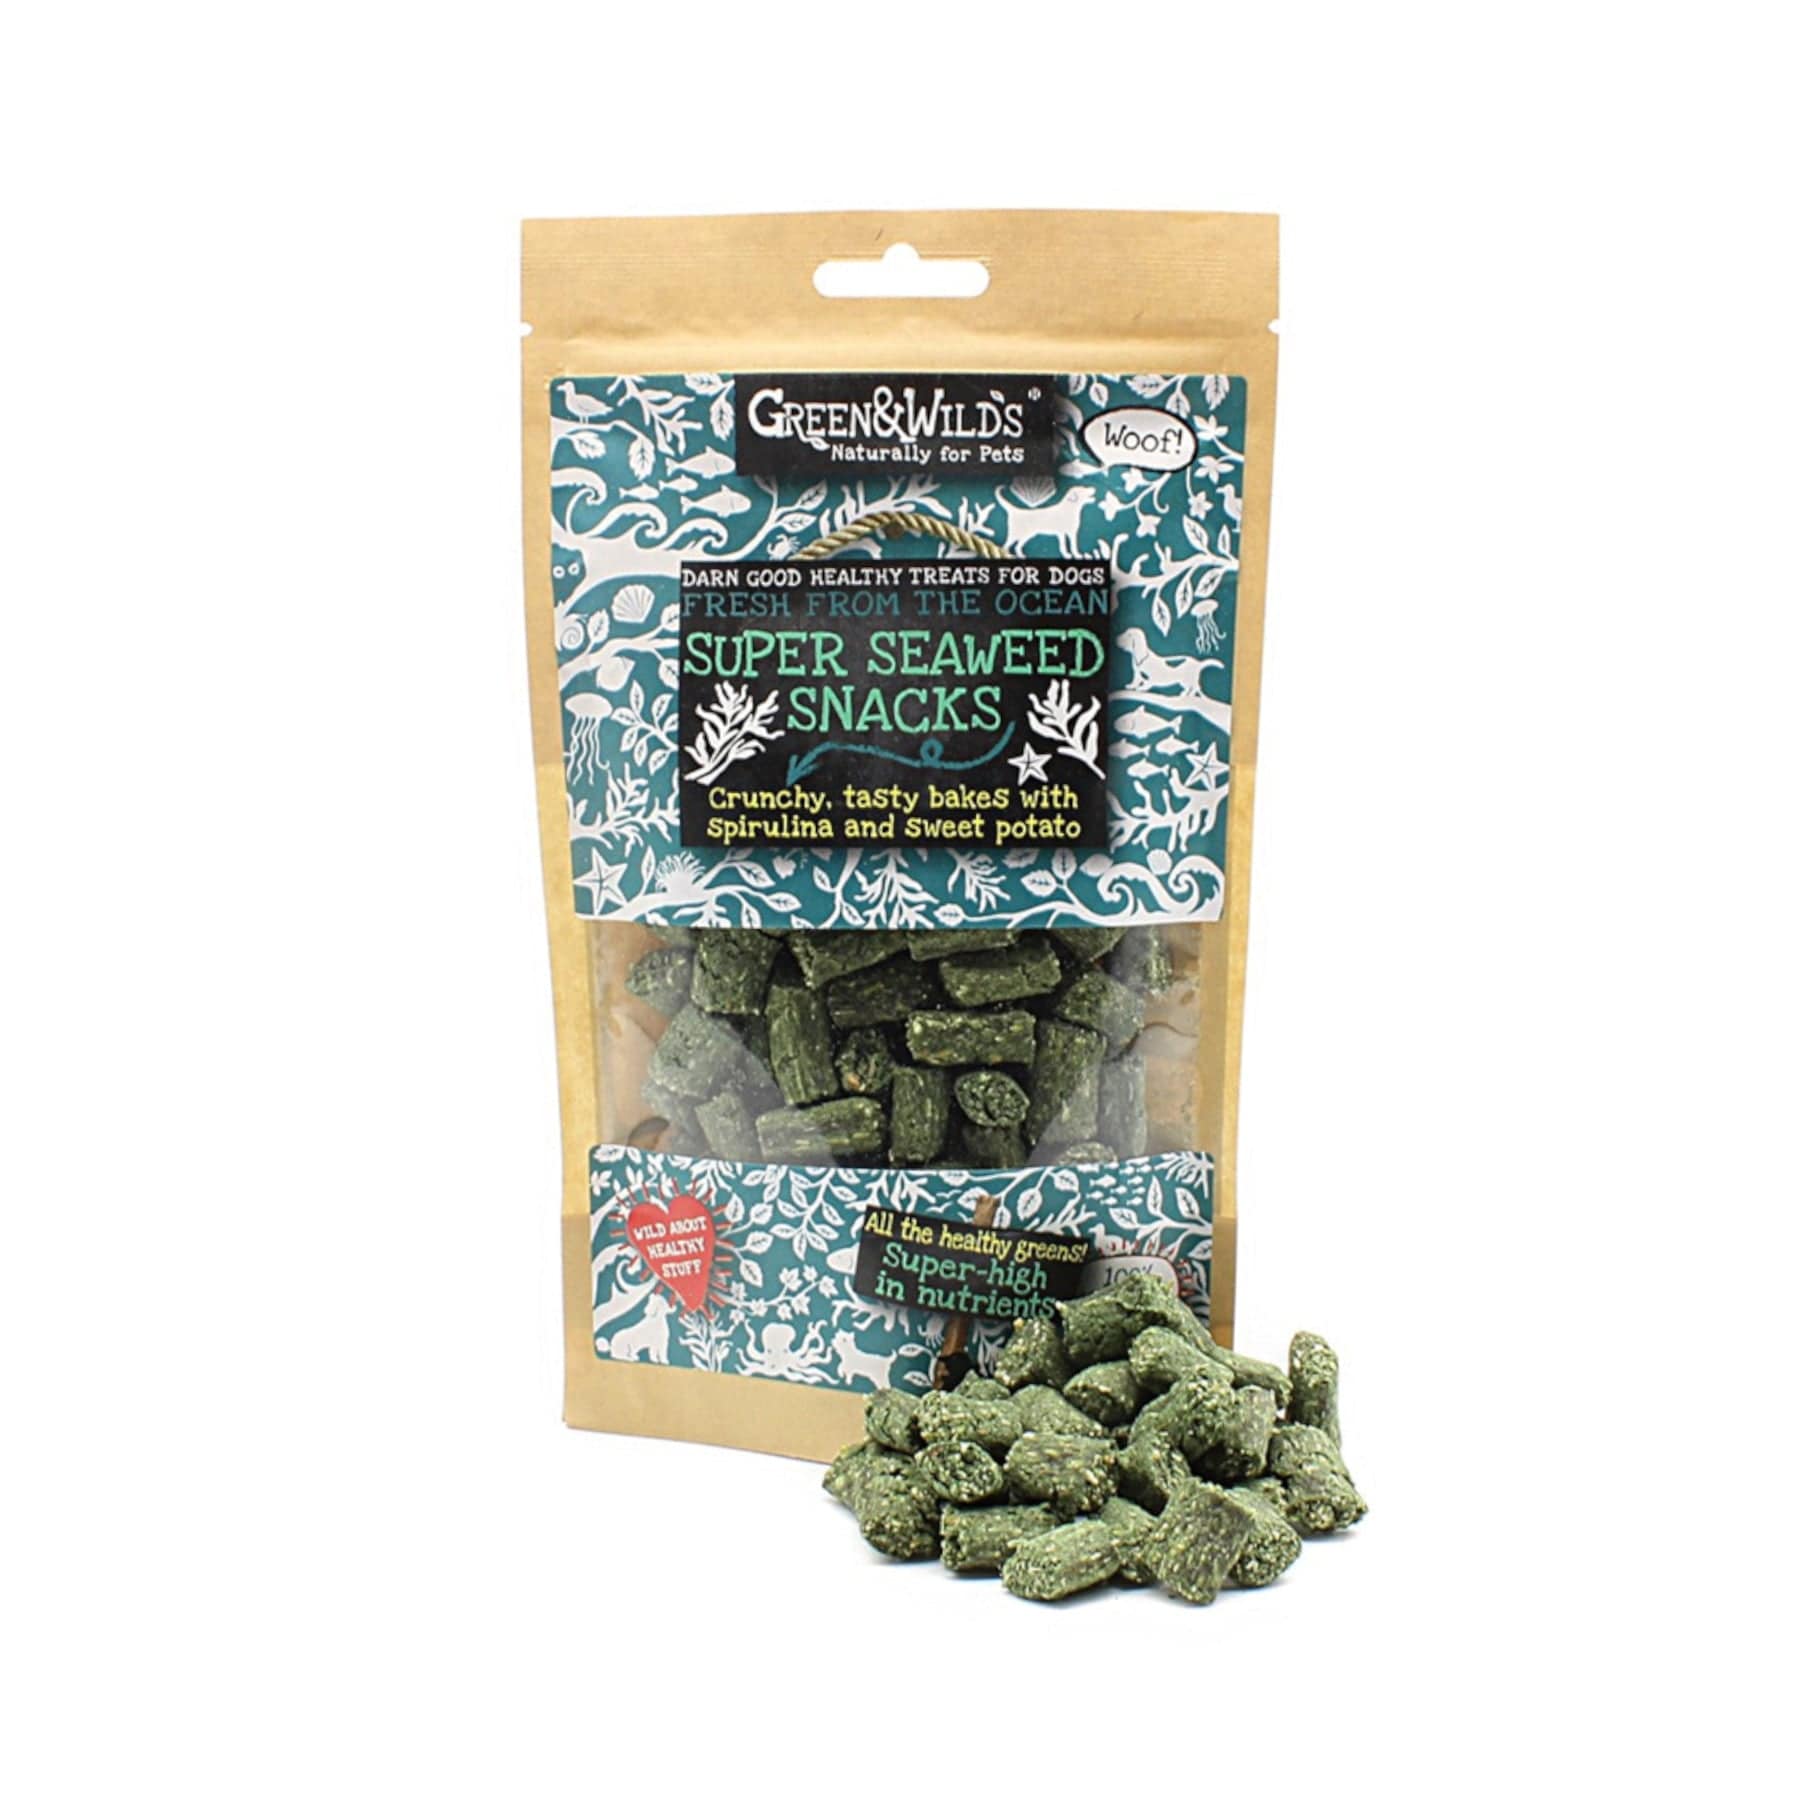 Green & Wild's Super Seaweed Snacks for dogs, natural healthy dog treats with spirulina and sweet potato, nutritious crunchy pet snacks in eco-friendly packaging